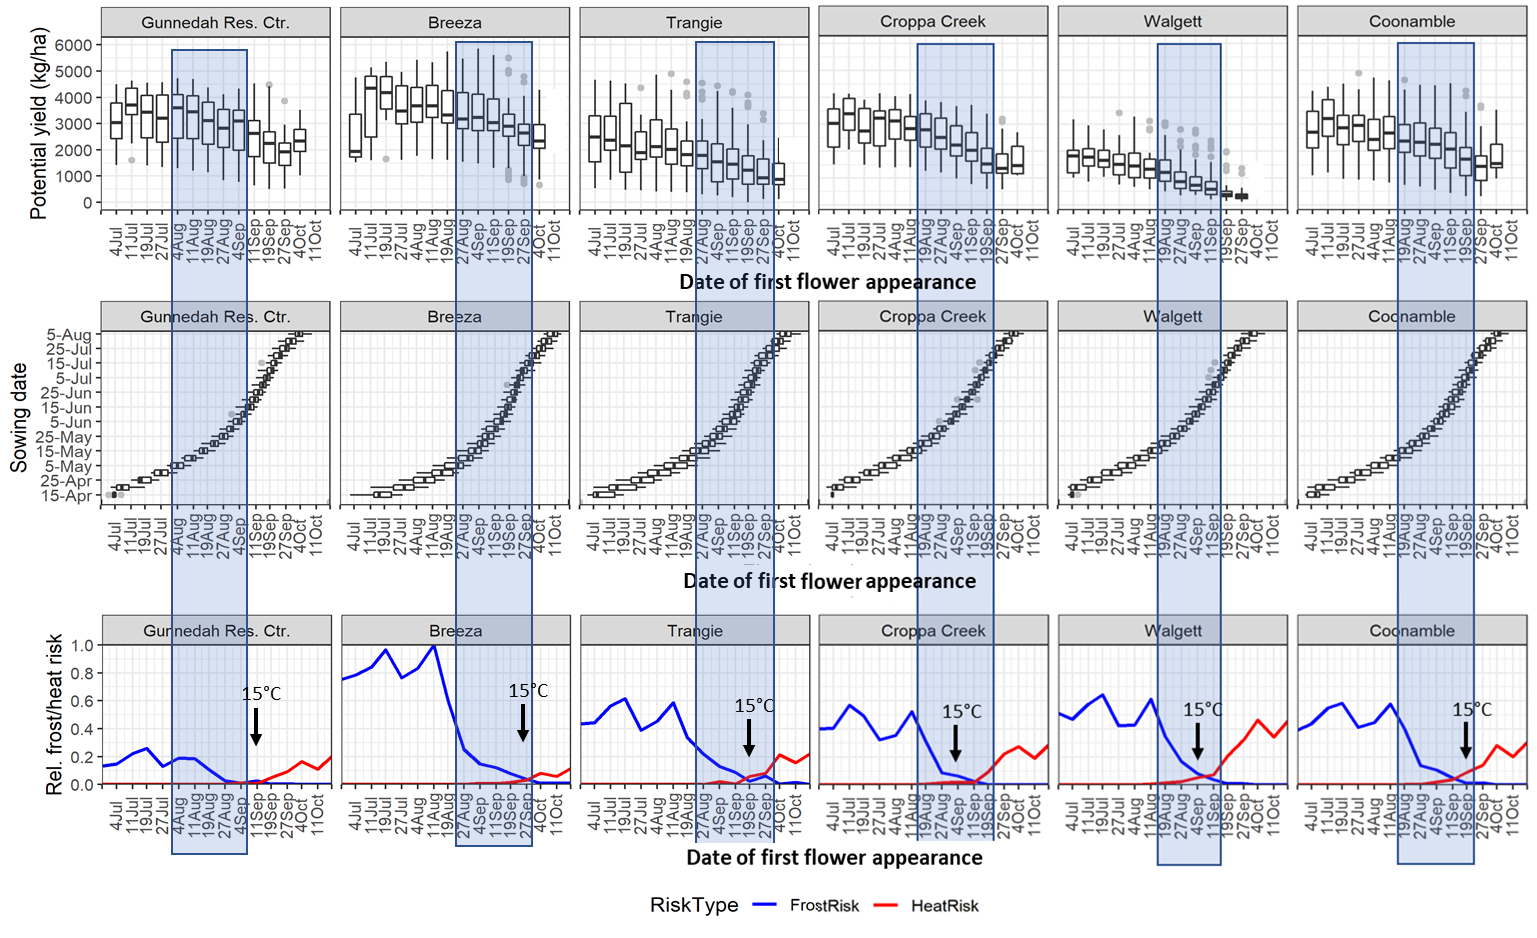 This series of graphs shows the water-limited yield potential, sowing date and relative frost/heat risk, plotted against the date of first flower appearance for PBA HatTrick  at six locations in northern NSW. Shaded area represents the predicted optimum window for appearance of first flowers. Arrows and ‘15°C’ mark the first week that has an average daily temperature greater than 15°C in the second half of the year, i.e. when conditions become favourable for pod-set. 